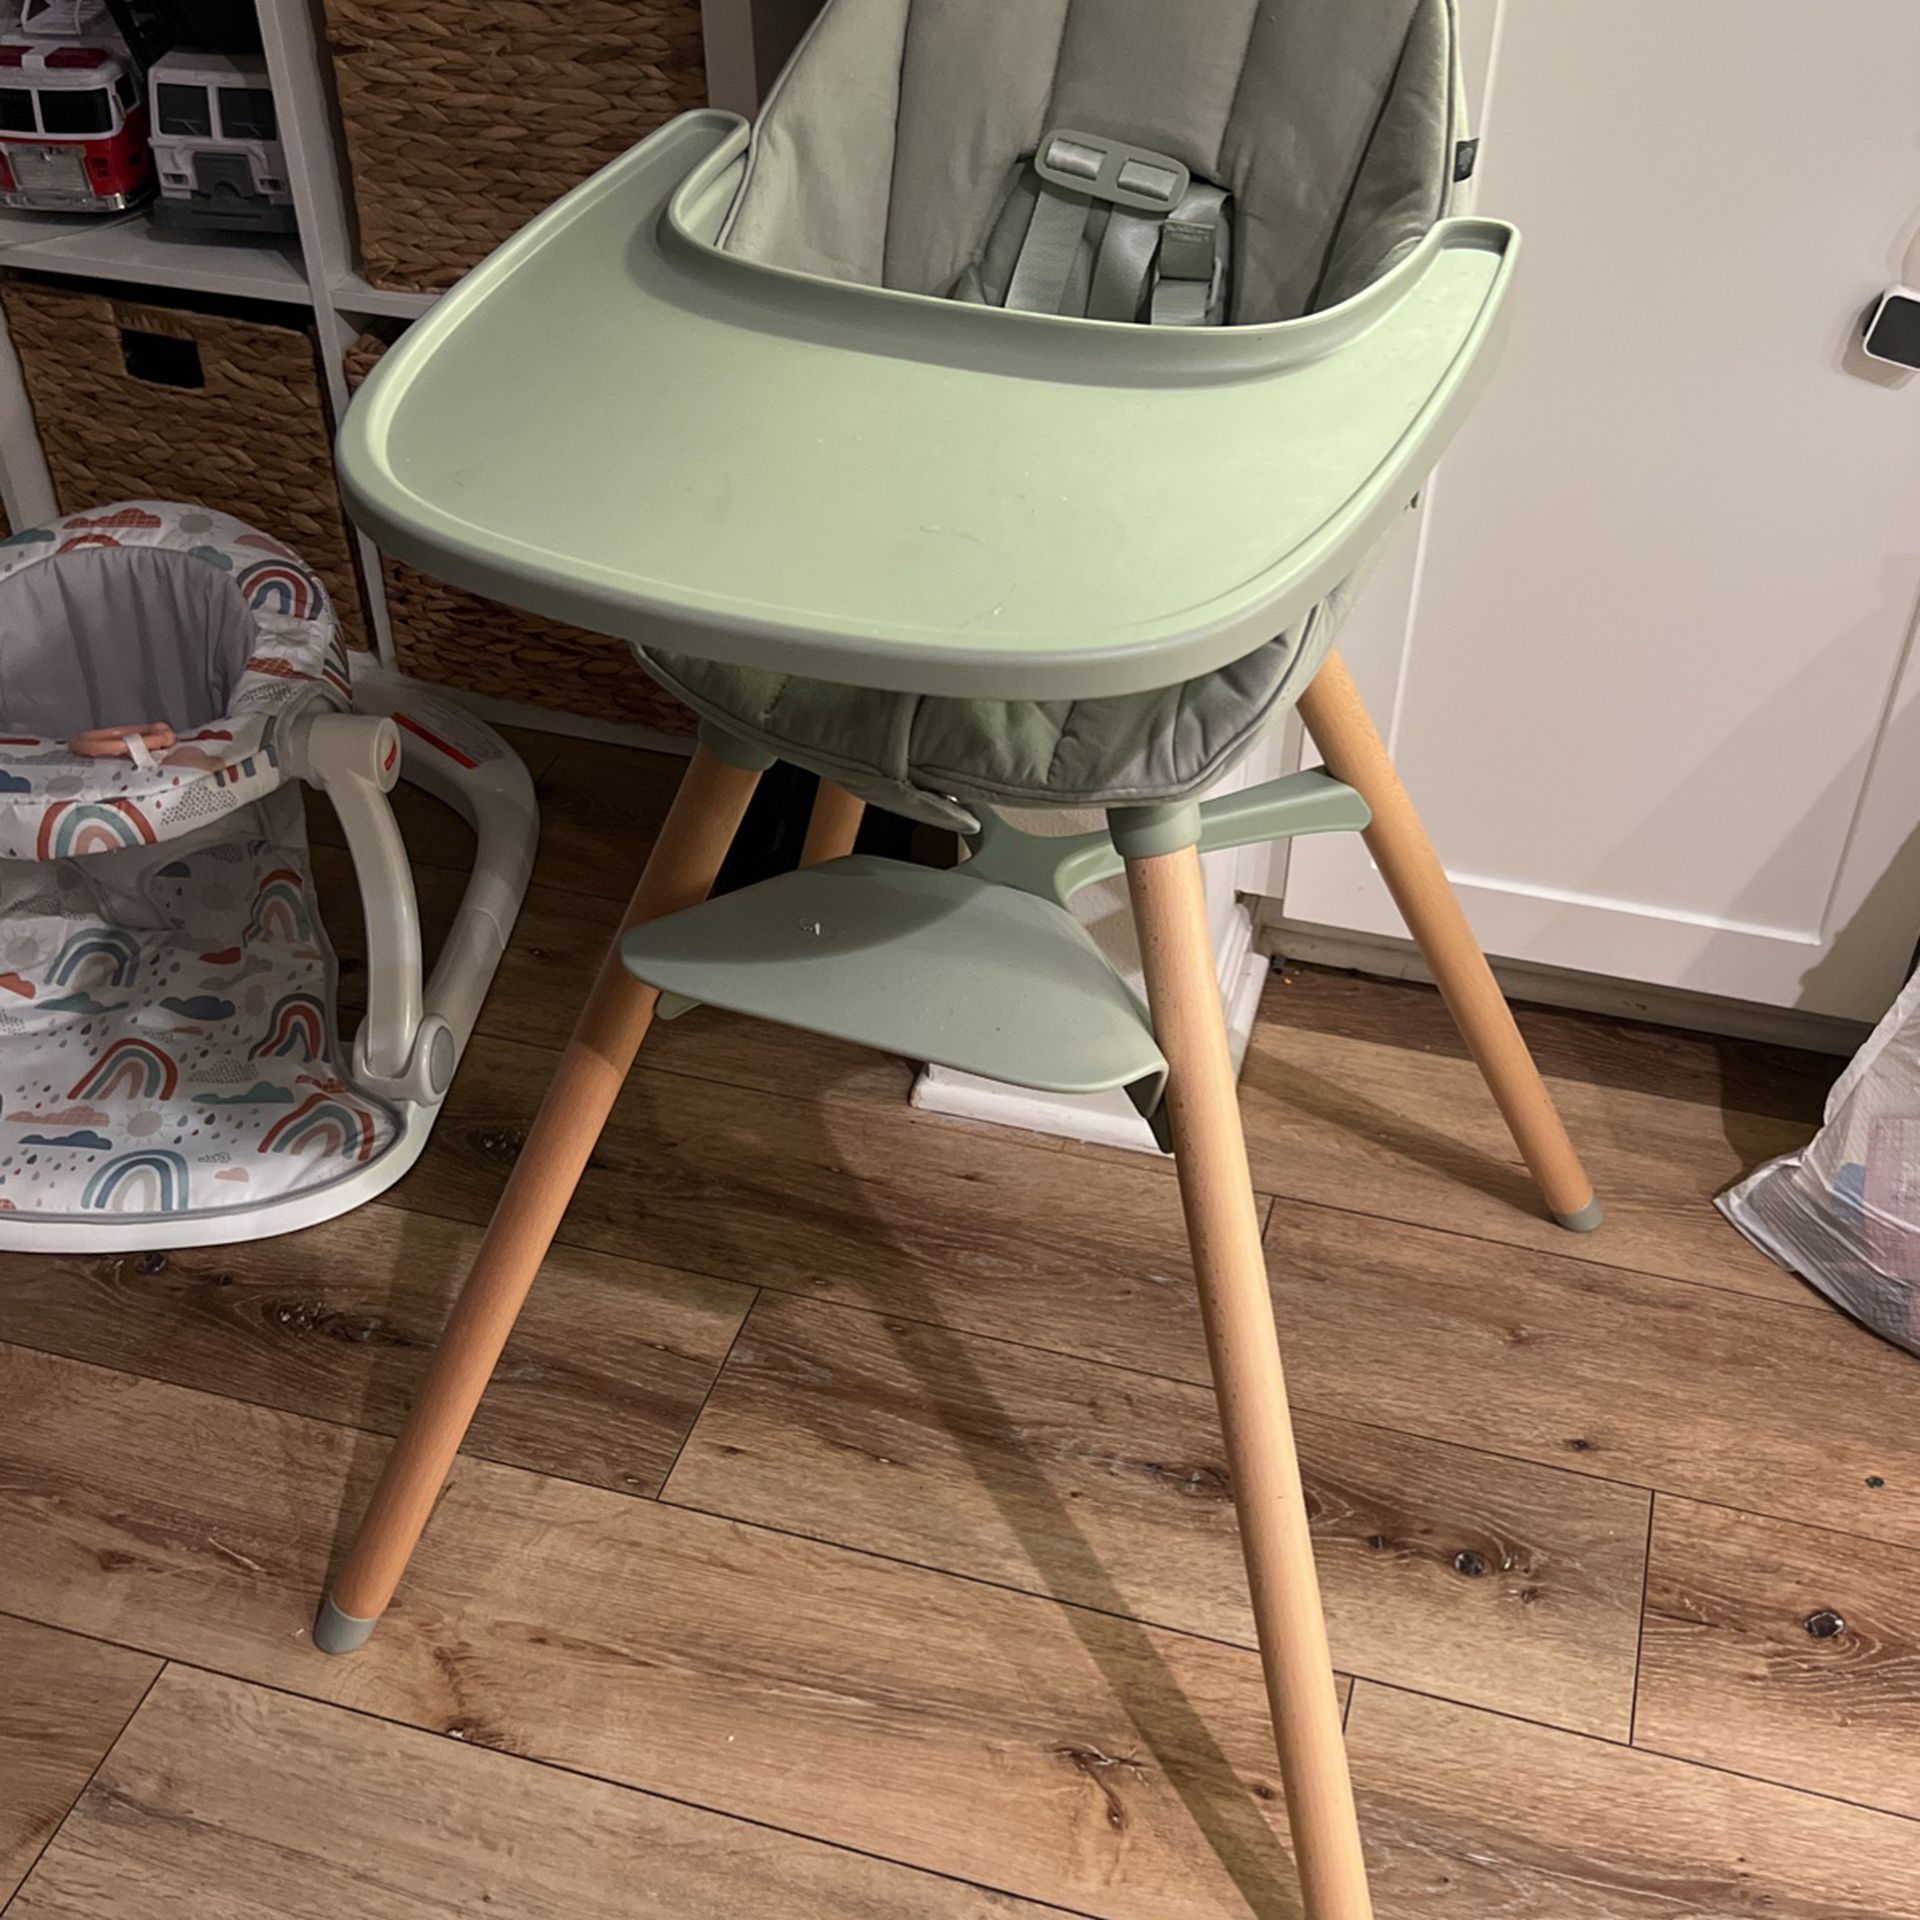 LALO Highchair or High Chair Used Twice 